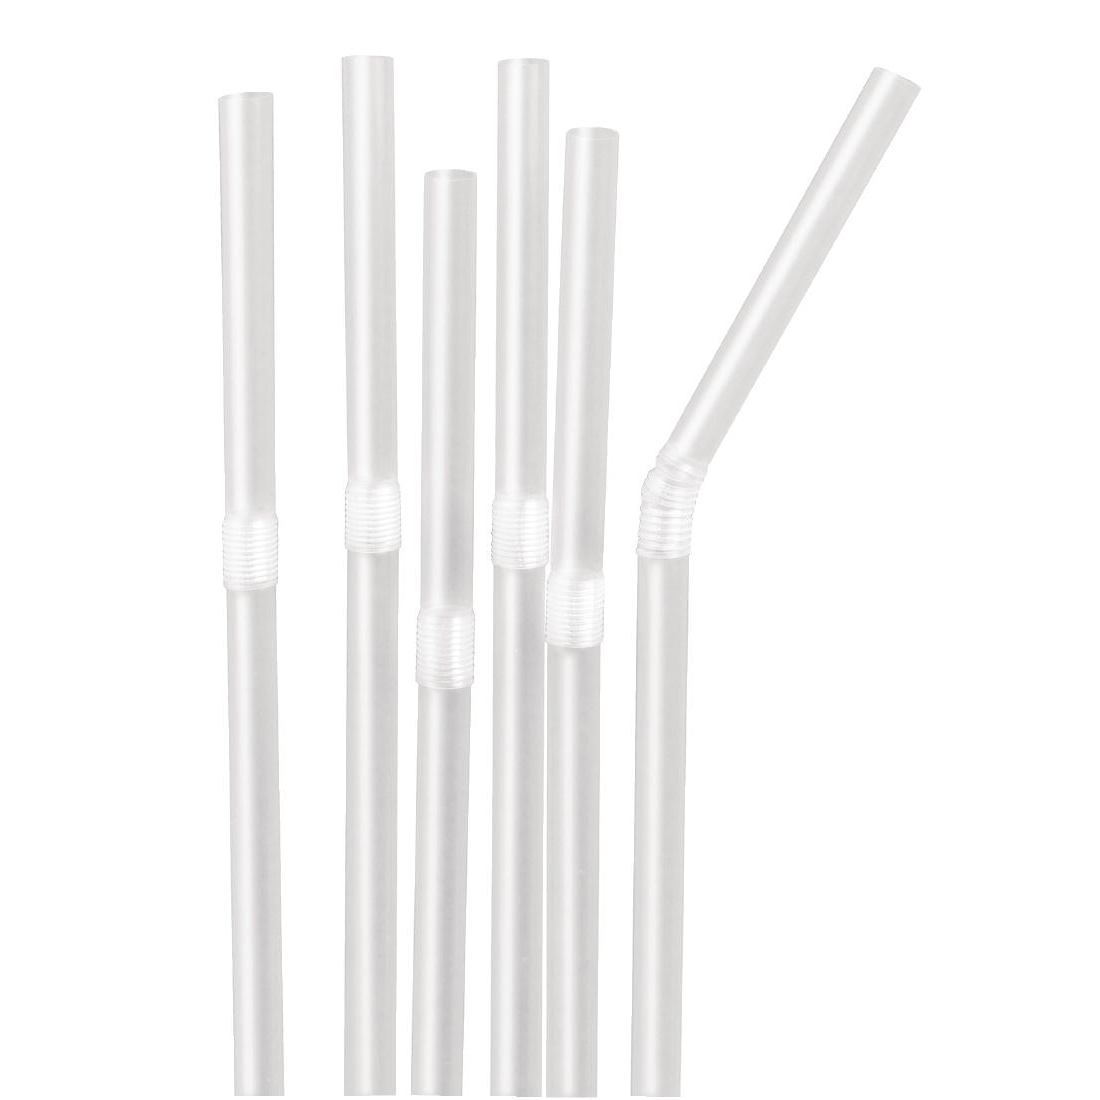 ce312-flexi-straw-clear-group